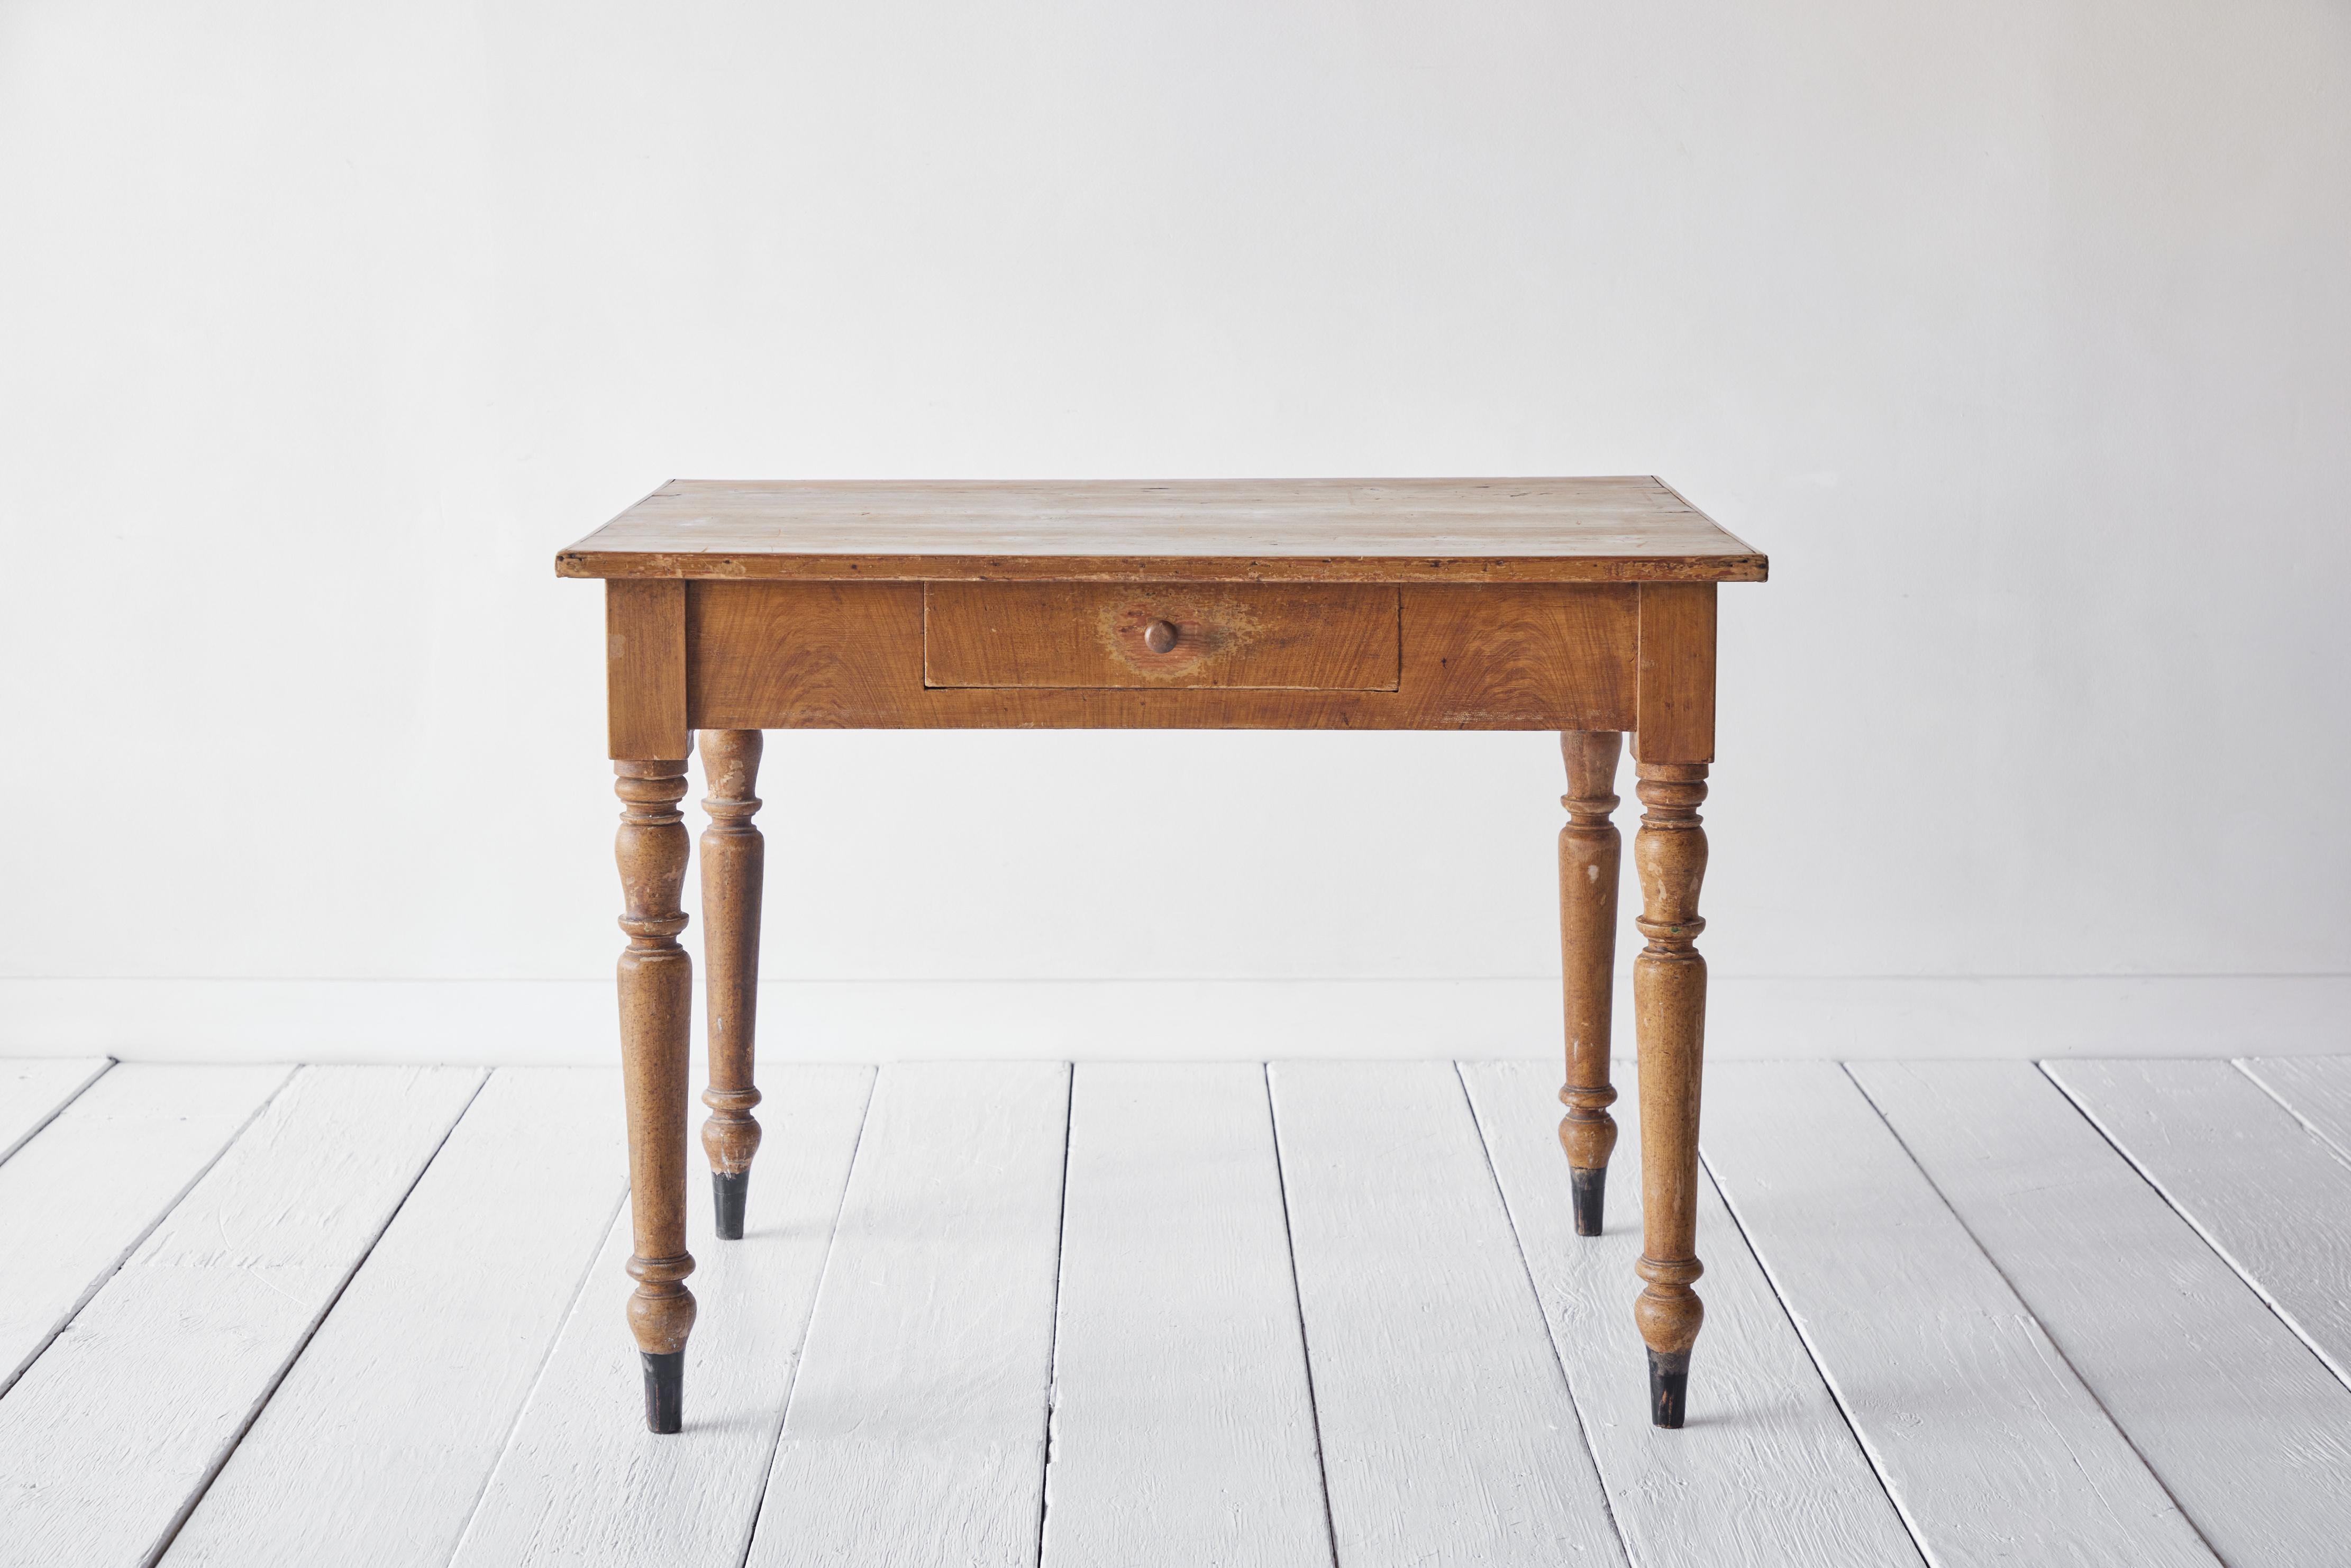 Rustic early American table turned leg table with a single drawer. The grain on the table offers rustic charm and patina.